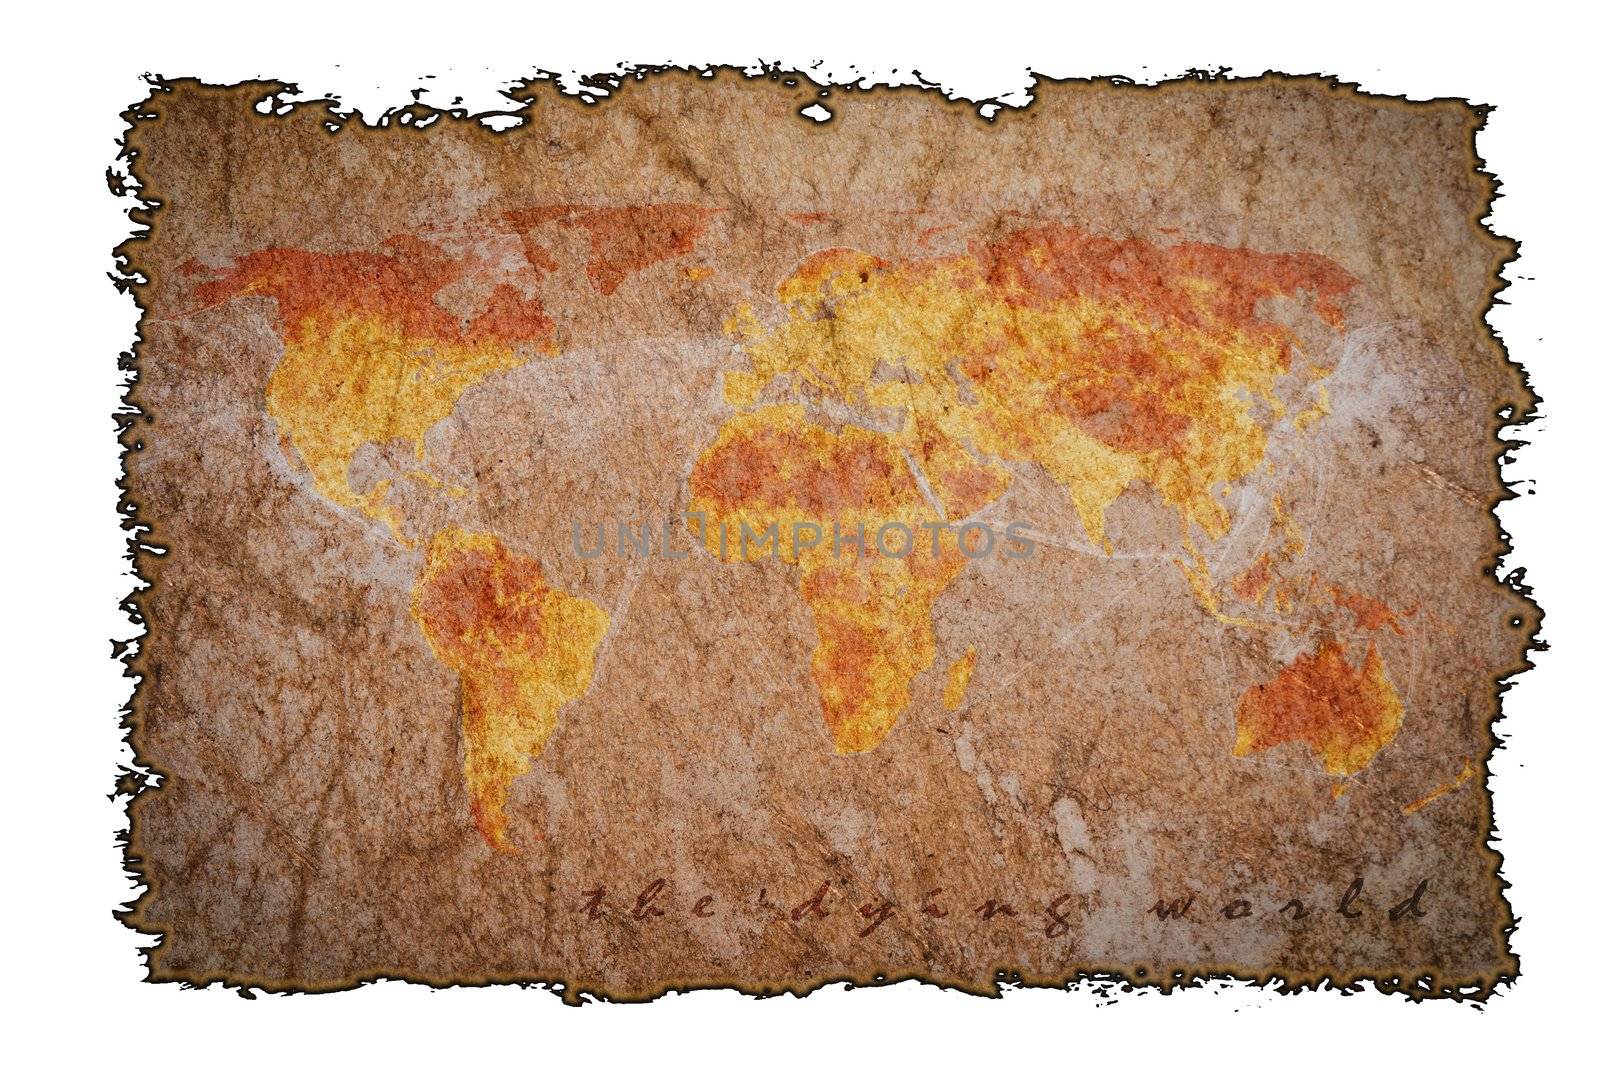 Old vintage map on burned paper background, can be use for various vintage concepts and world business concepts.